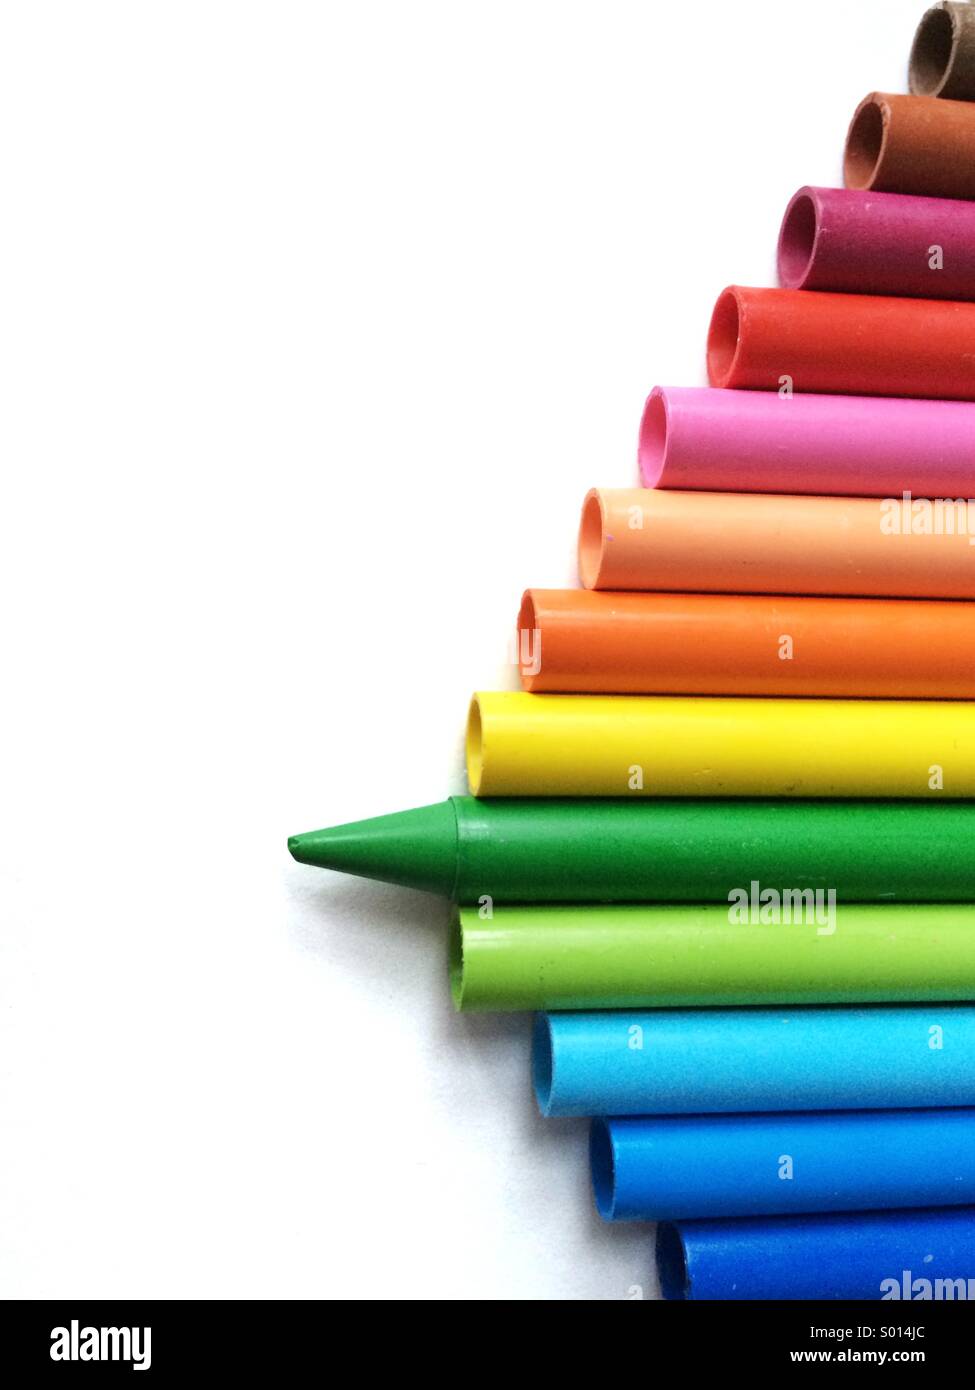 Green Crayons Stock Photo, Picture and Royalty Free Image. Image 18648083.